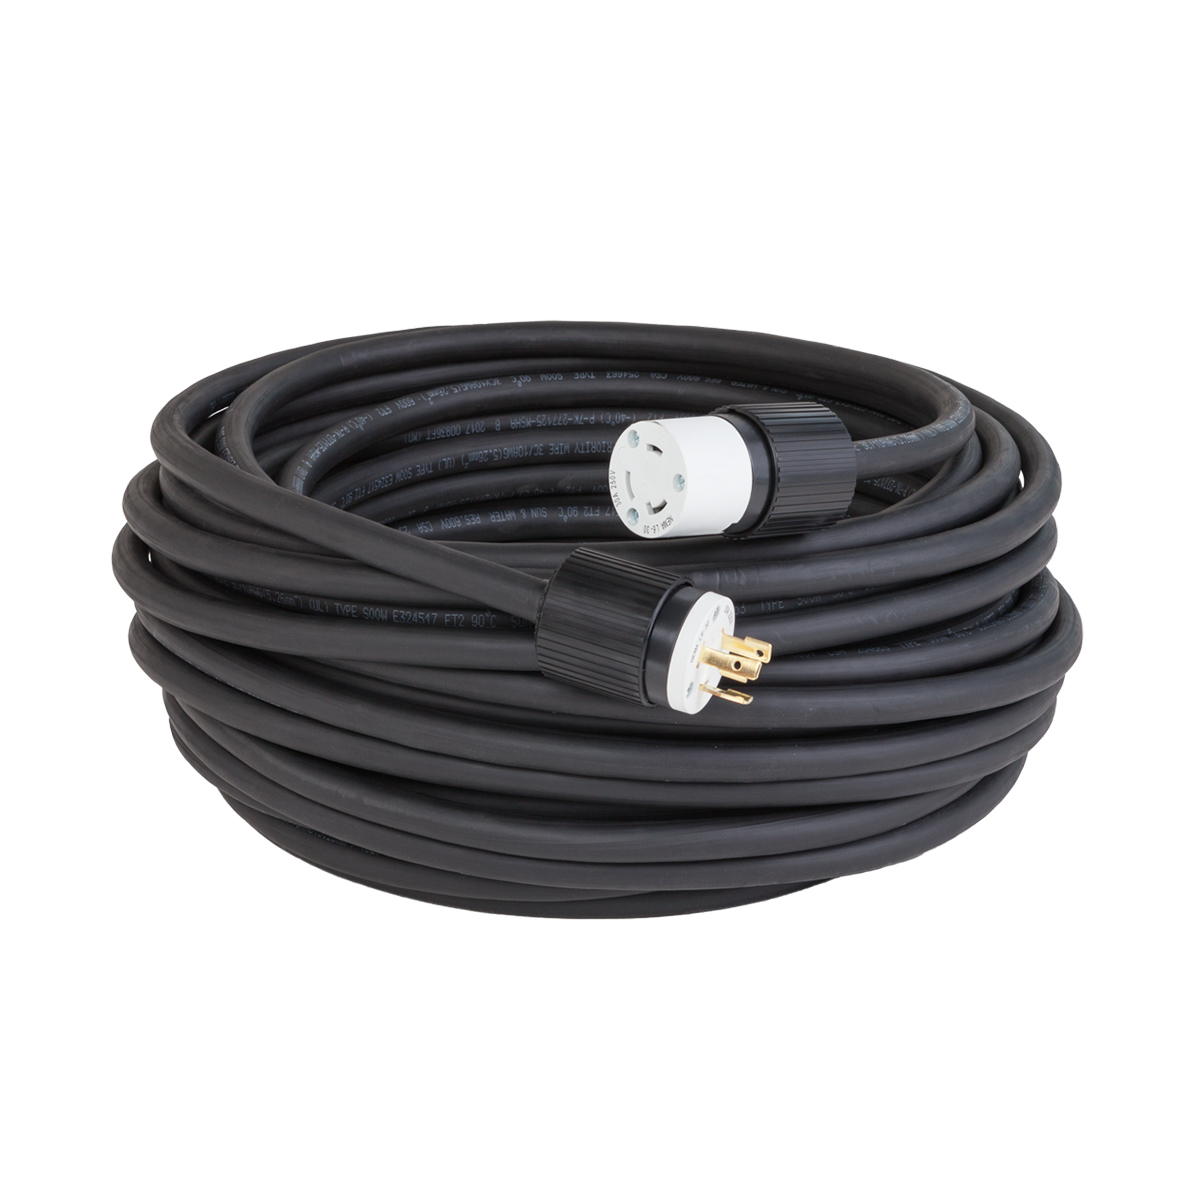 100 Foot 10 3 Power Cord 125V 30 Amp Sow Rubber NEMA L530P Plugs, from CEP